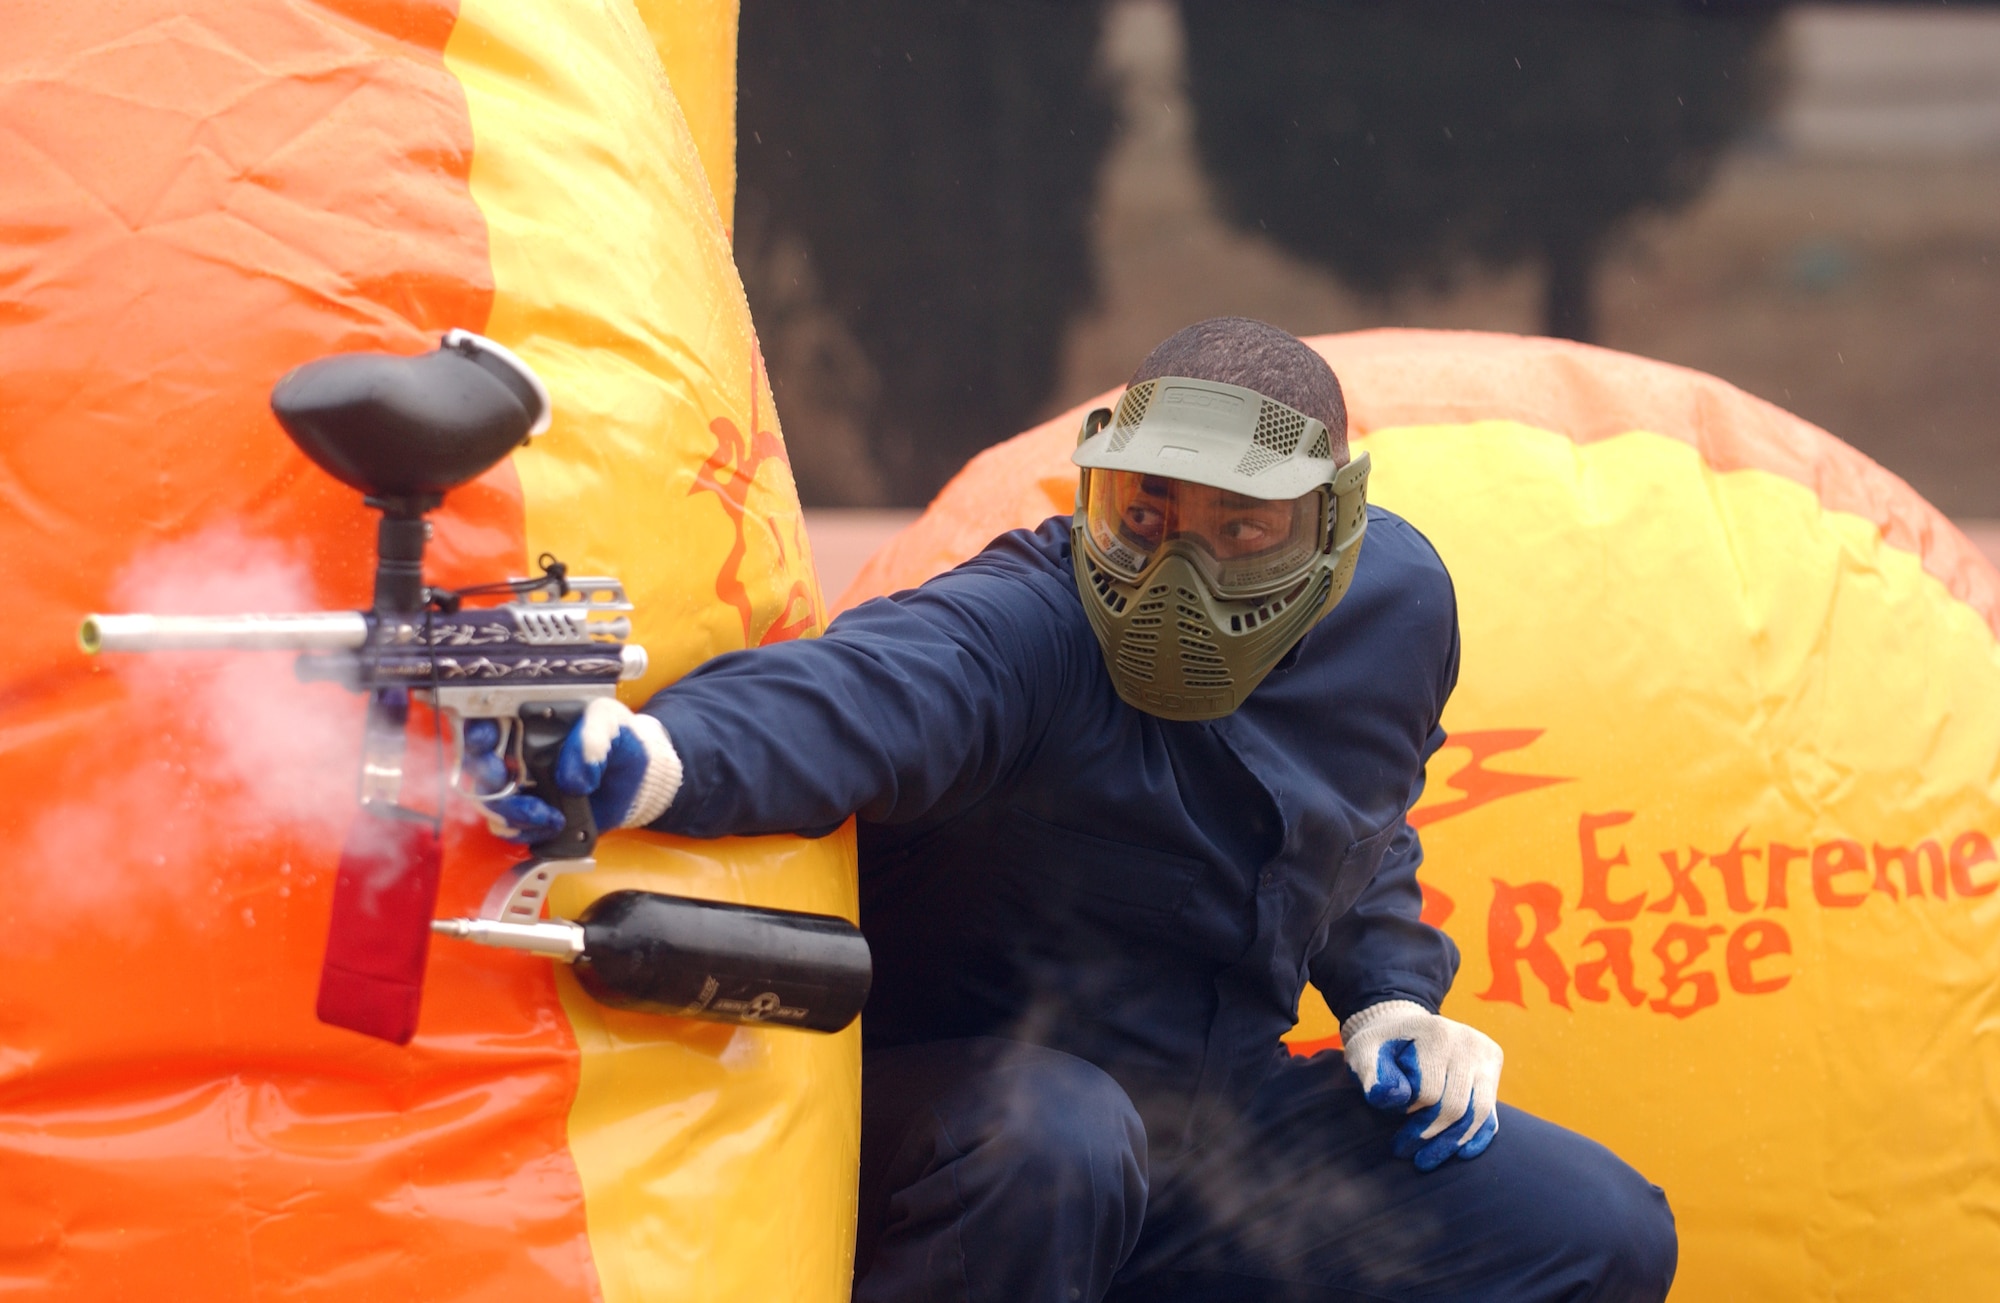 Capt. Jerime Reid fires at the "enemy" during the grand opening of the paintball course at Osan Air Base, South Korea, Tuesday, Feb. 28, 2006. Captain Reid is assigned to the 51st Services Squadron. (U.S. Air Force photo/Airman Gina Chiaverotti)

